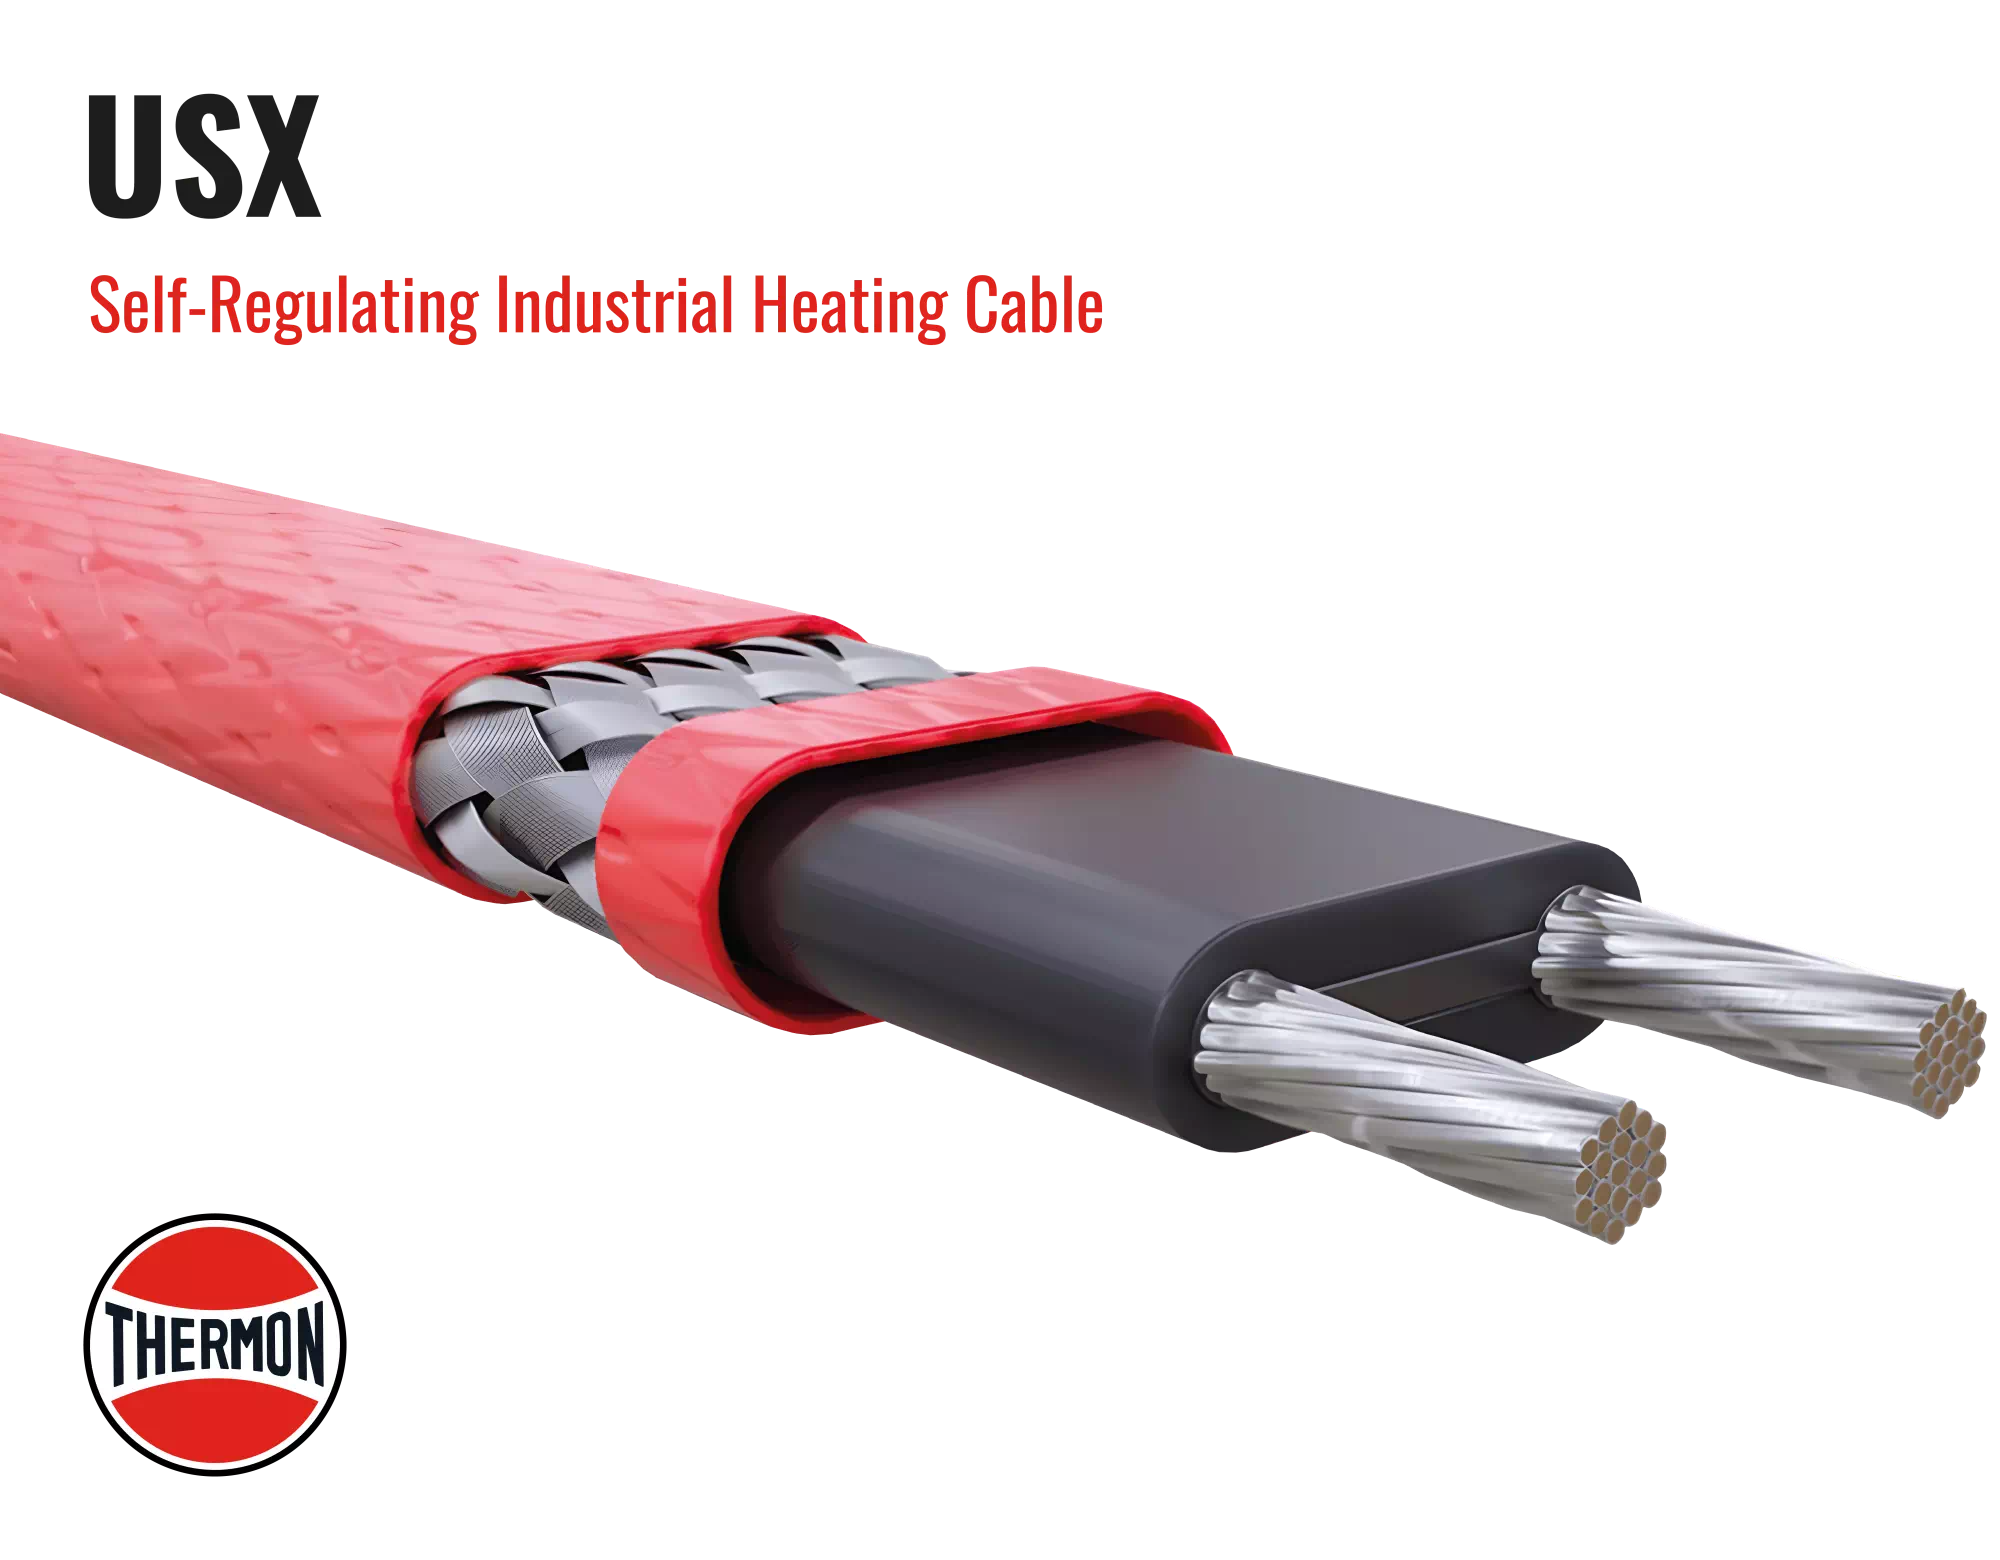 Thermon USX-Self-Regulating-Heat-Cable